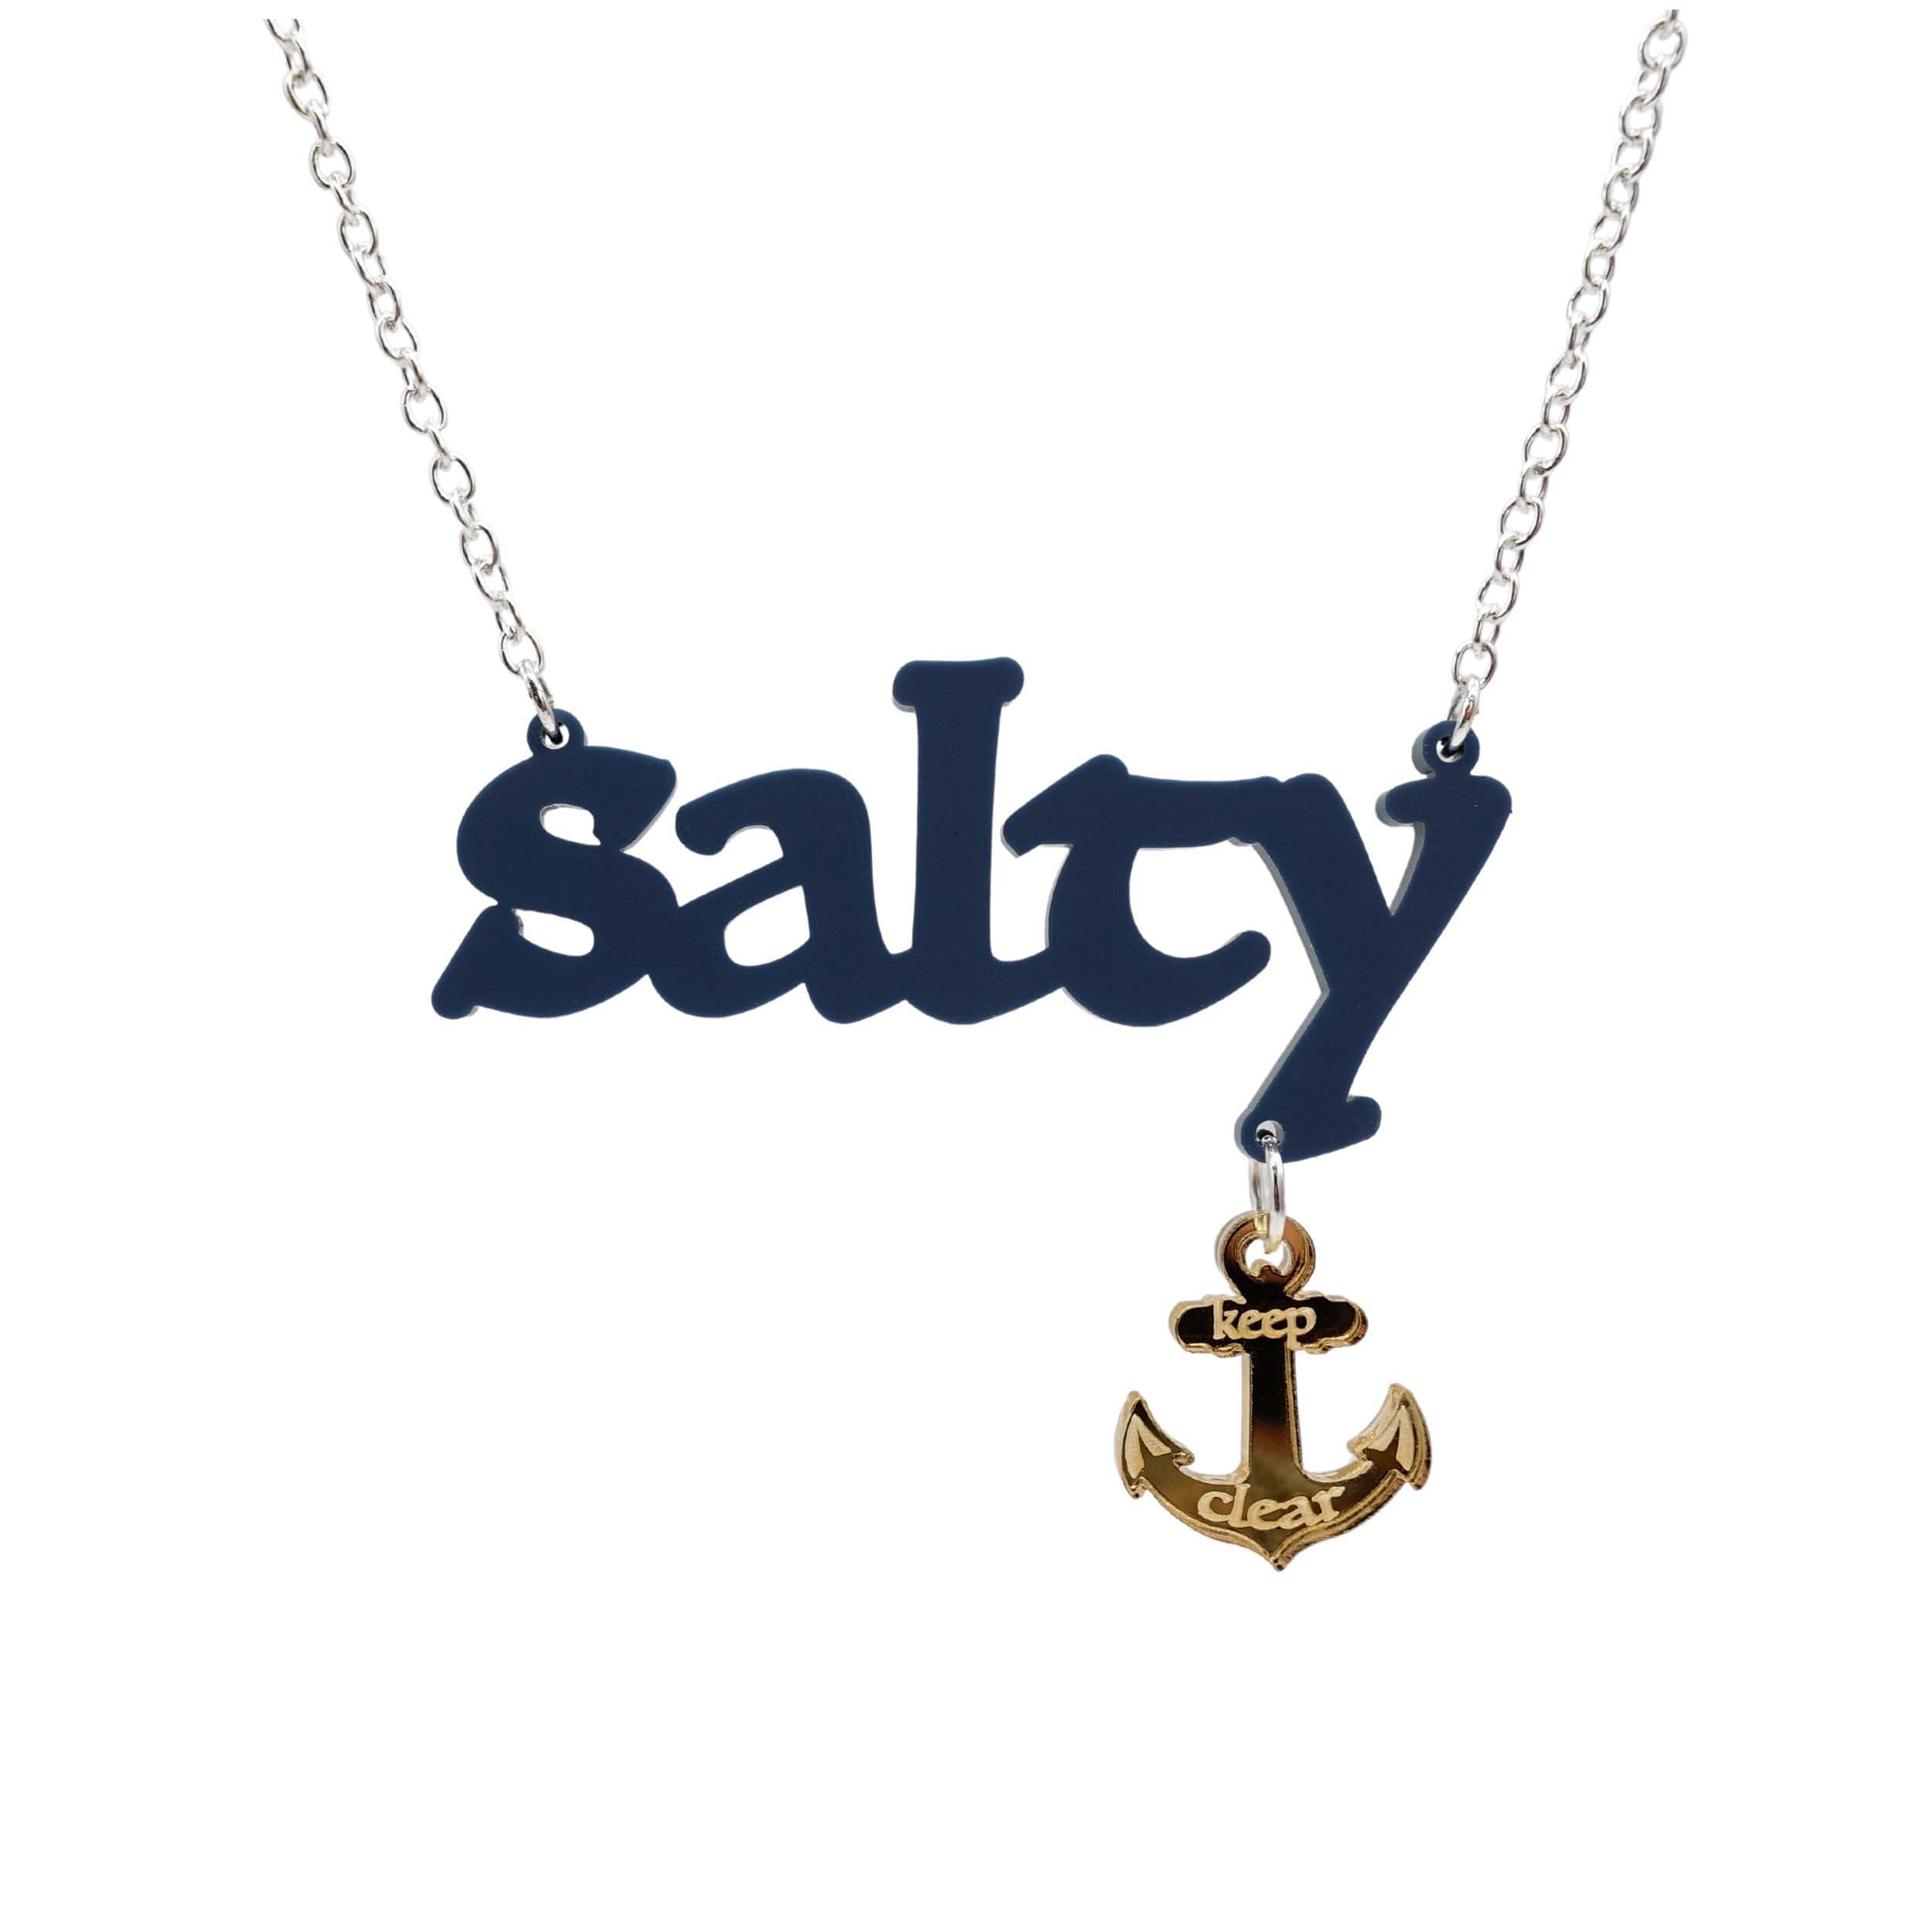 Salty necklace with keep clear anchor designed by Sarah Day for Wear and Resist. Shown hanging against a white background. 